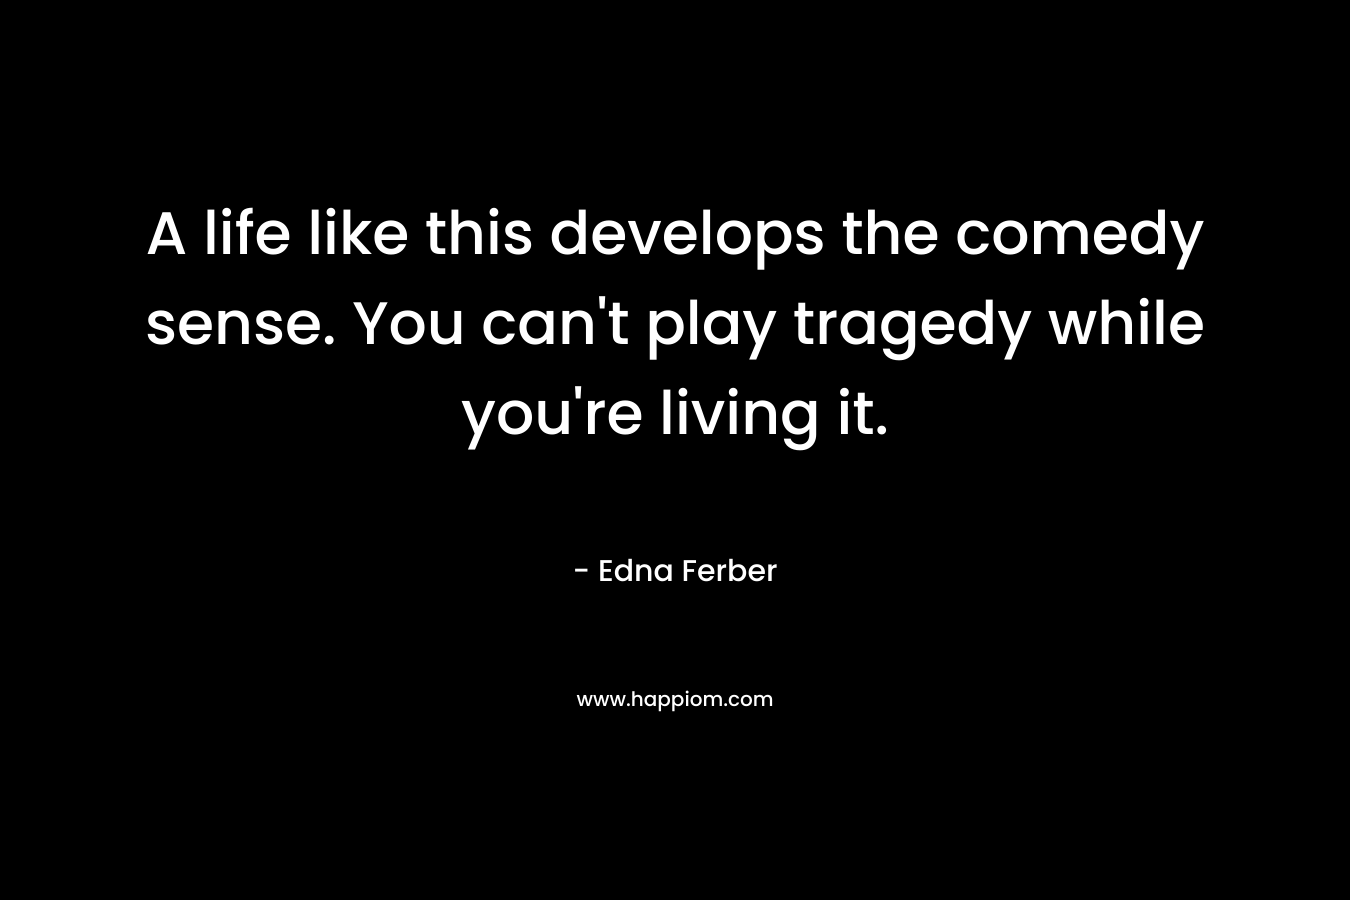 A life like this develops the comedy sense. You can’t play tragedy while you’re living it. – Edna Ferber